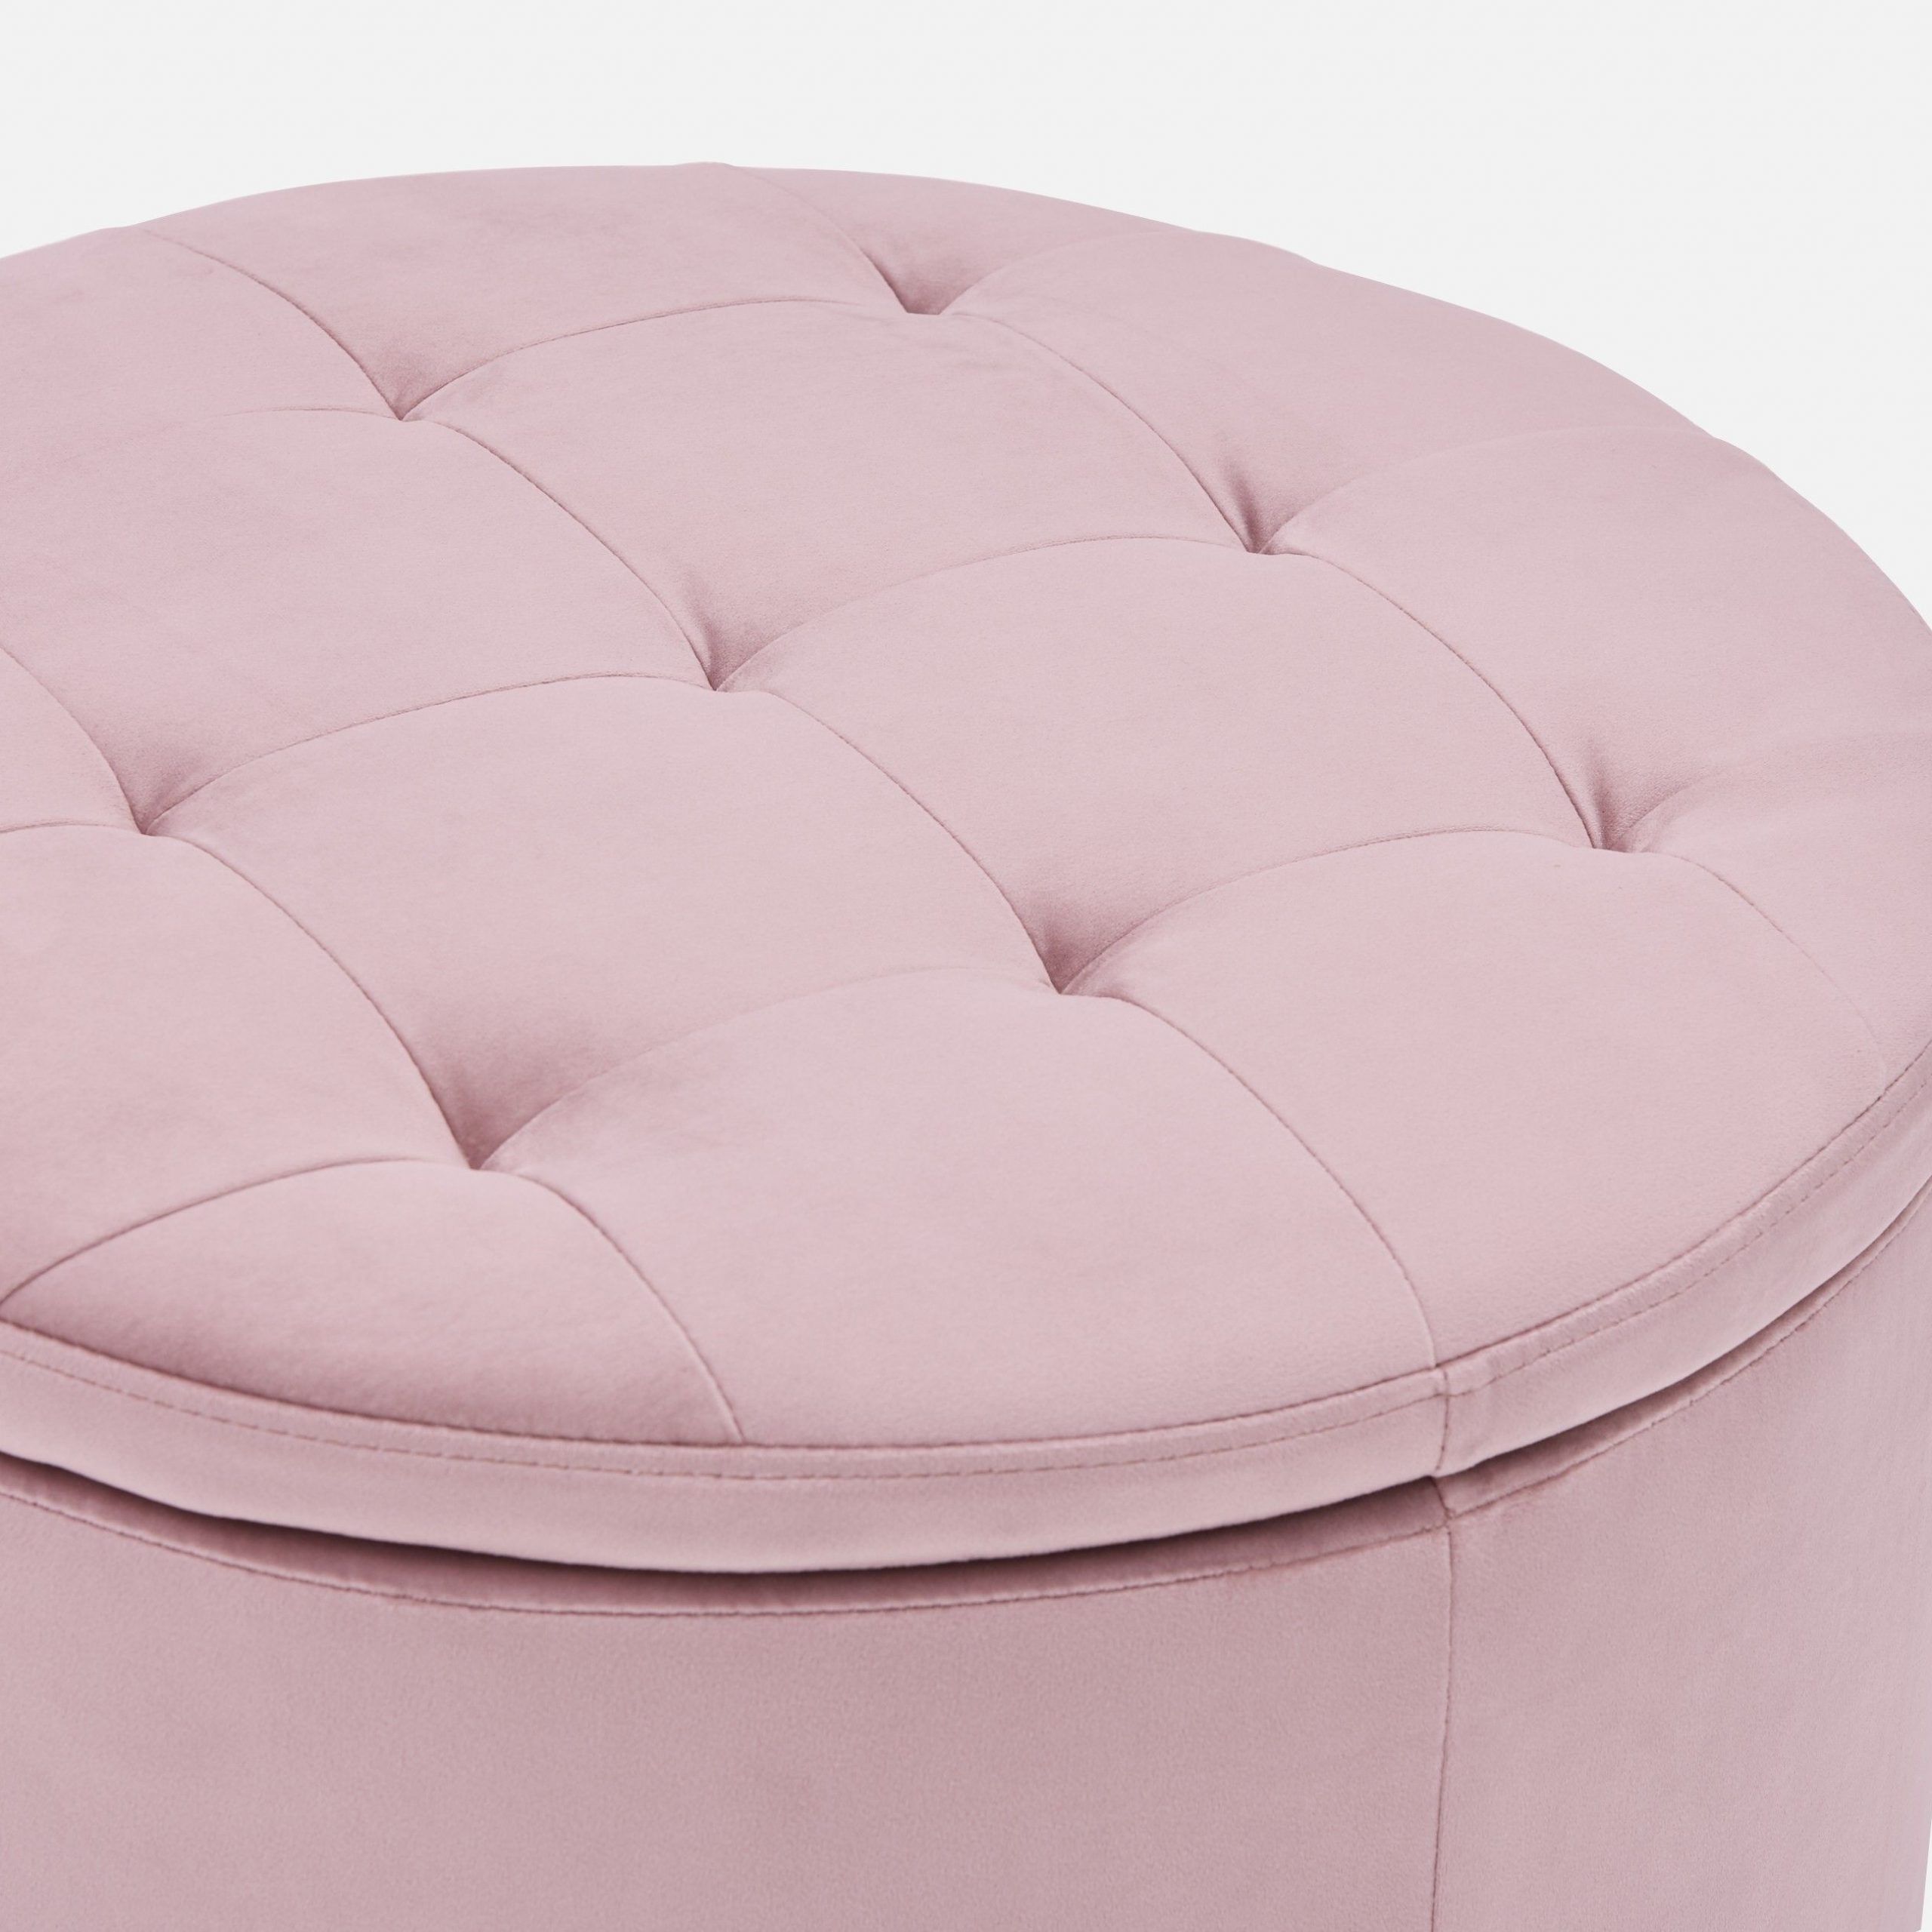 2020 Glam Light Pink Velvet Tufted Ottomans Intended For Mily – Velvet Ottoman With Storage – Purple And Pink (View 9 of 10)